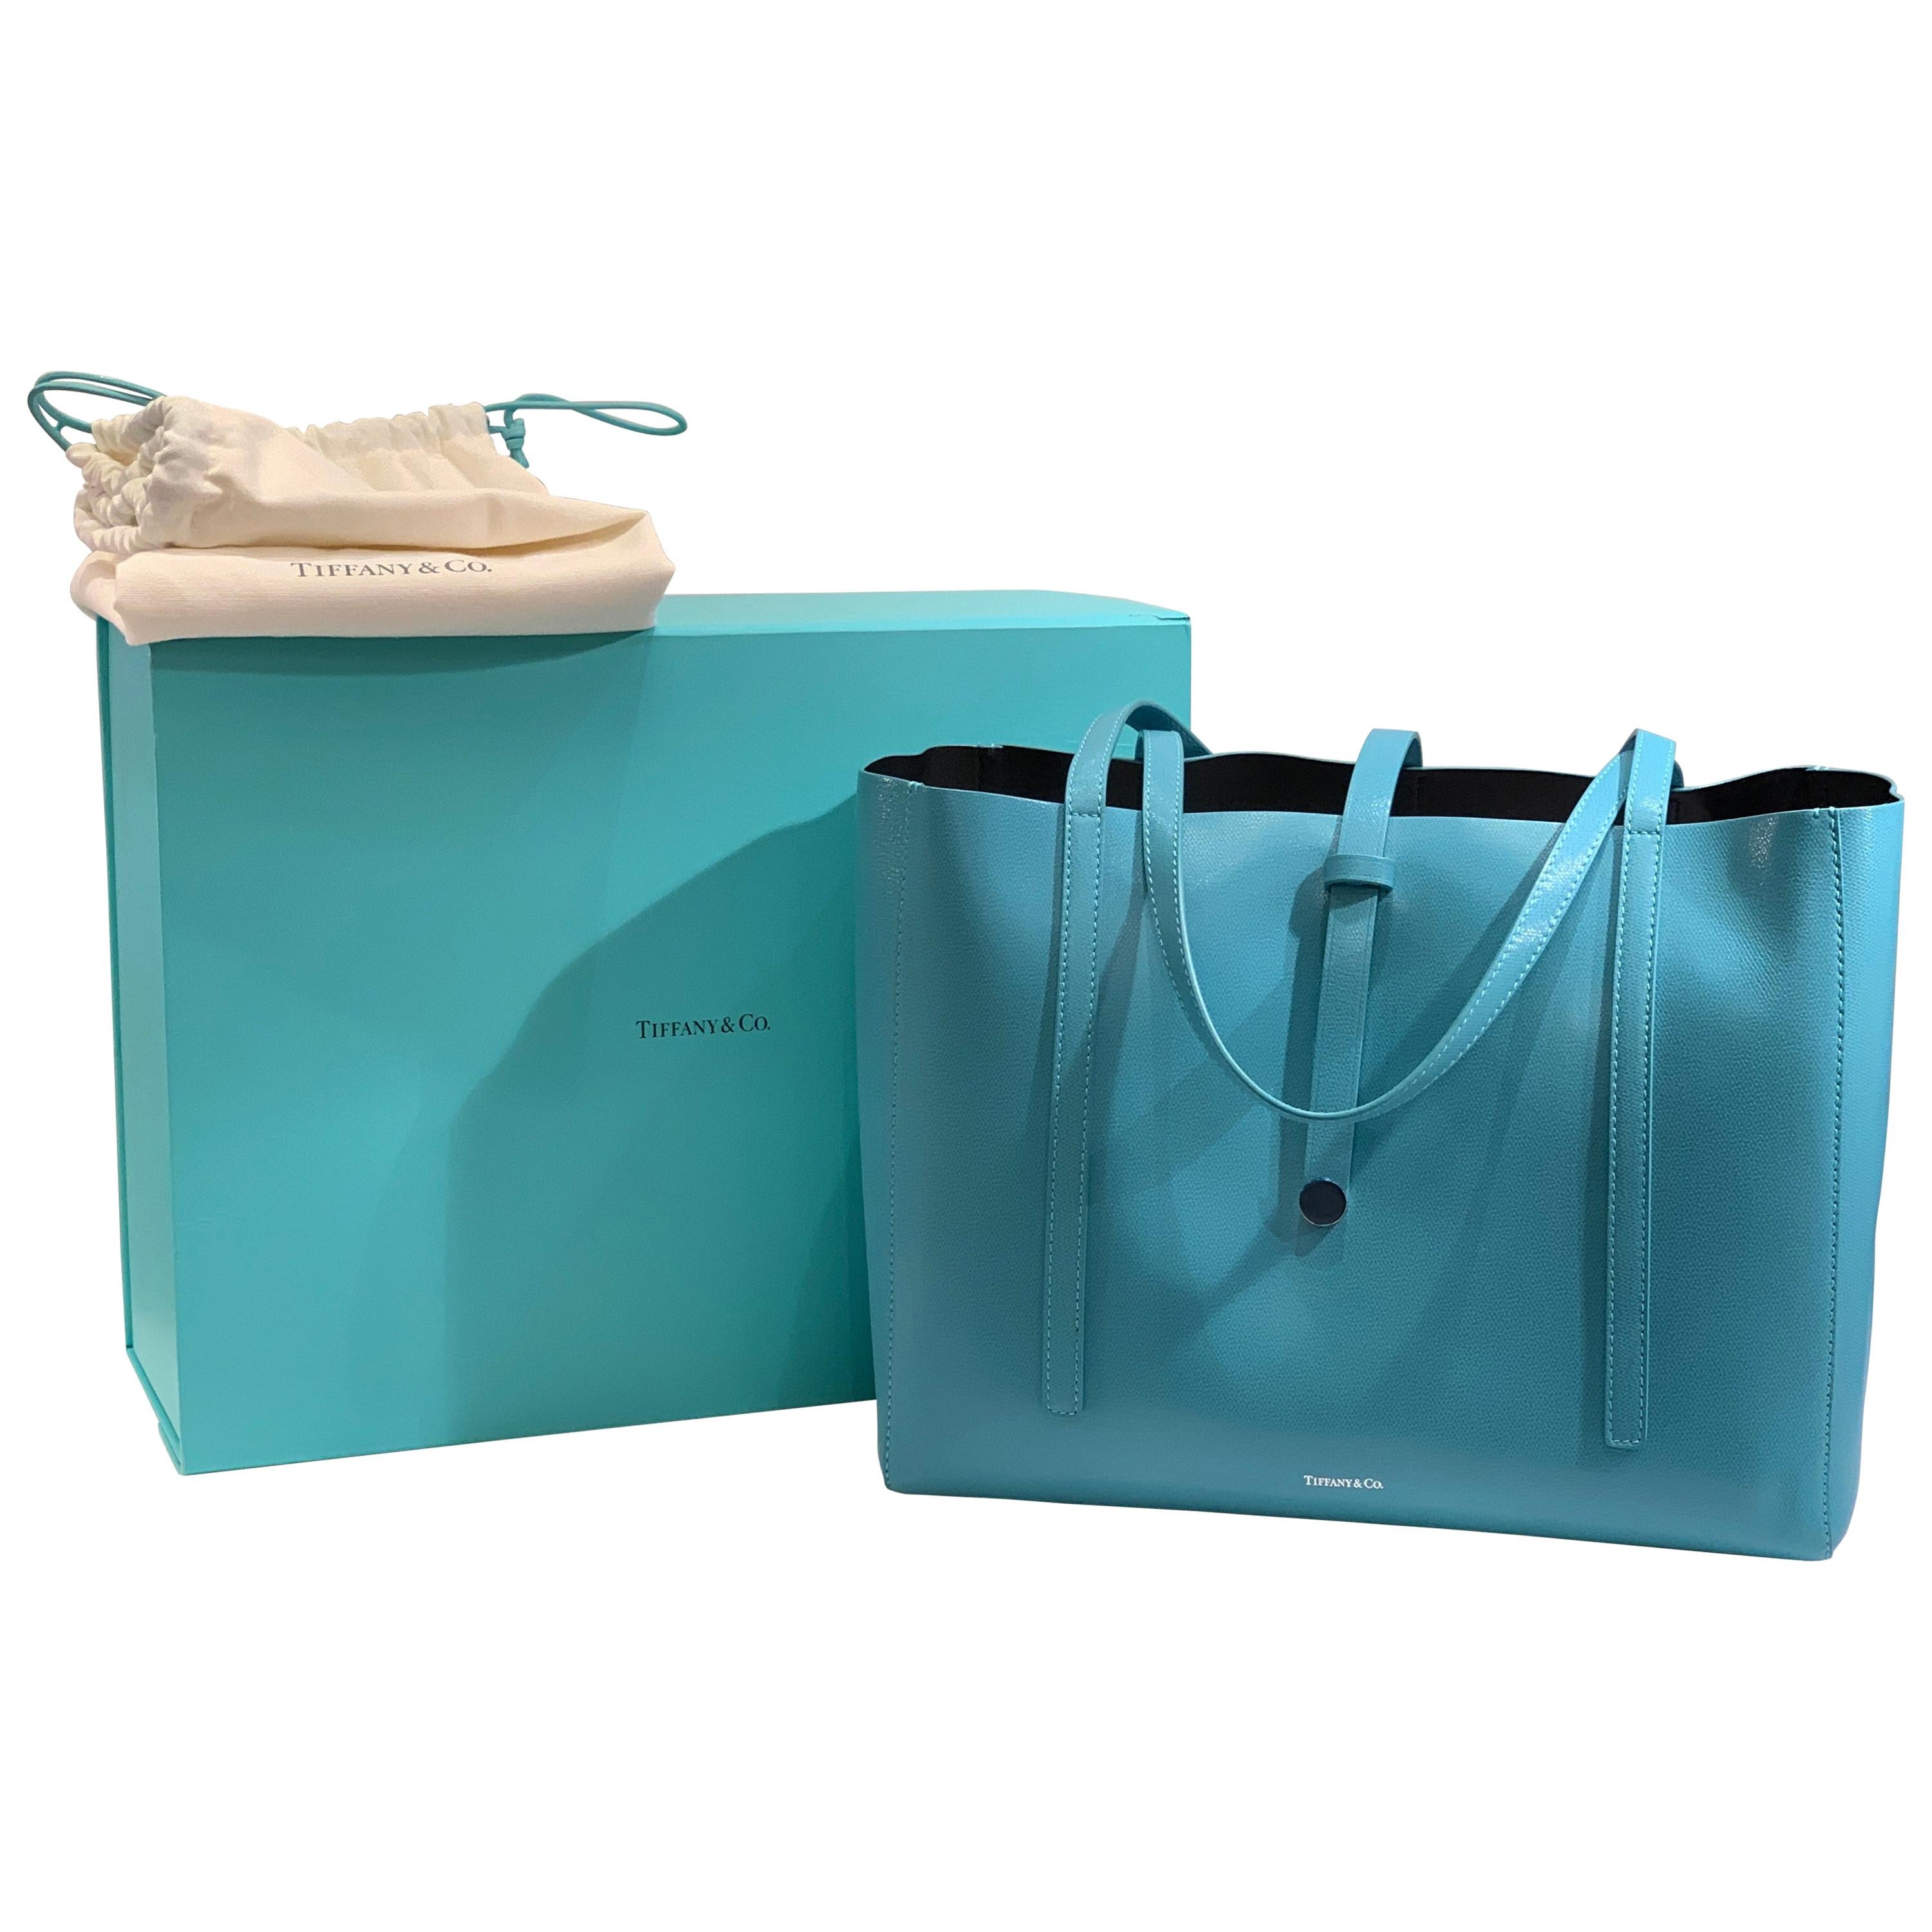 Large Tiffany & Co. Textured Leather East West Tote Bag Light Teal Made in Italy